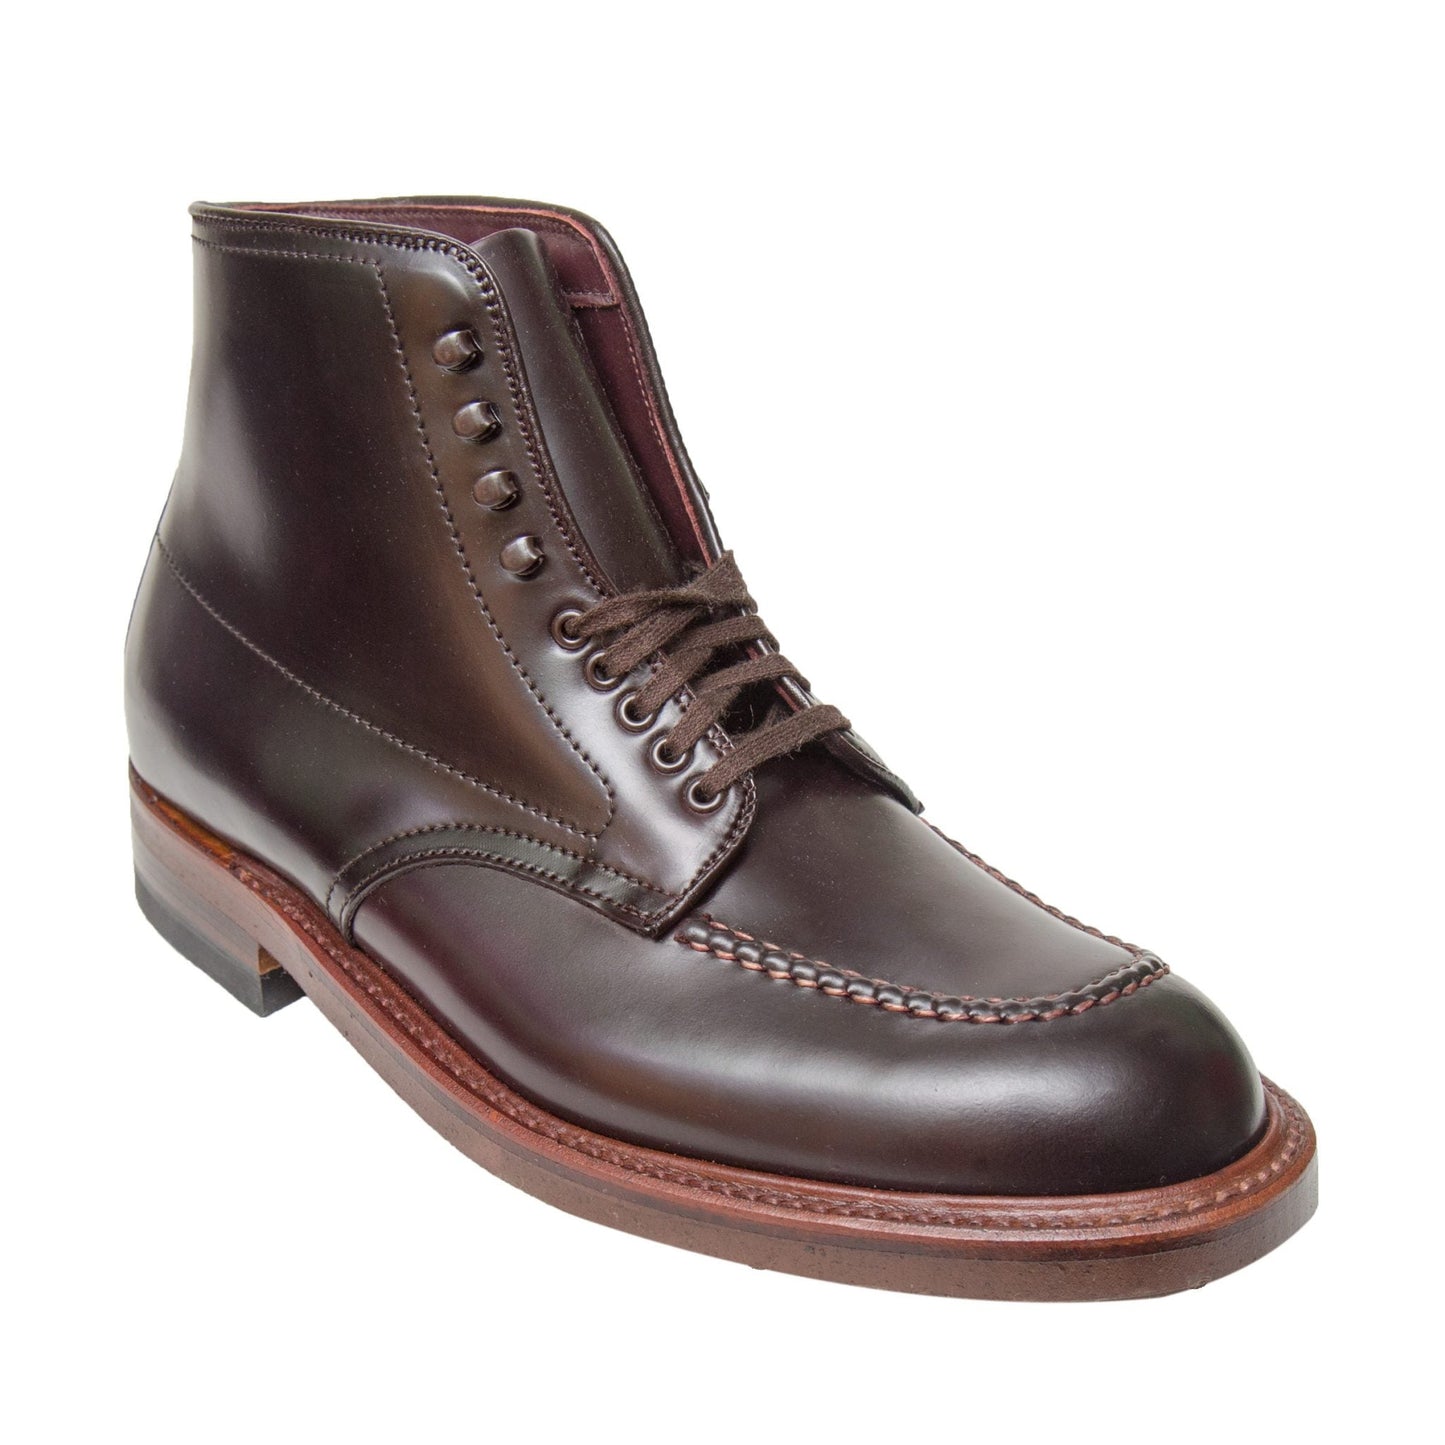 40538H - Indy Boot w Neoork Sole in Color 8 Shell